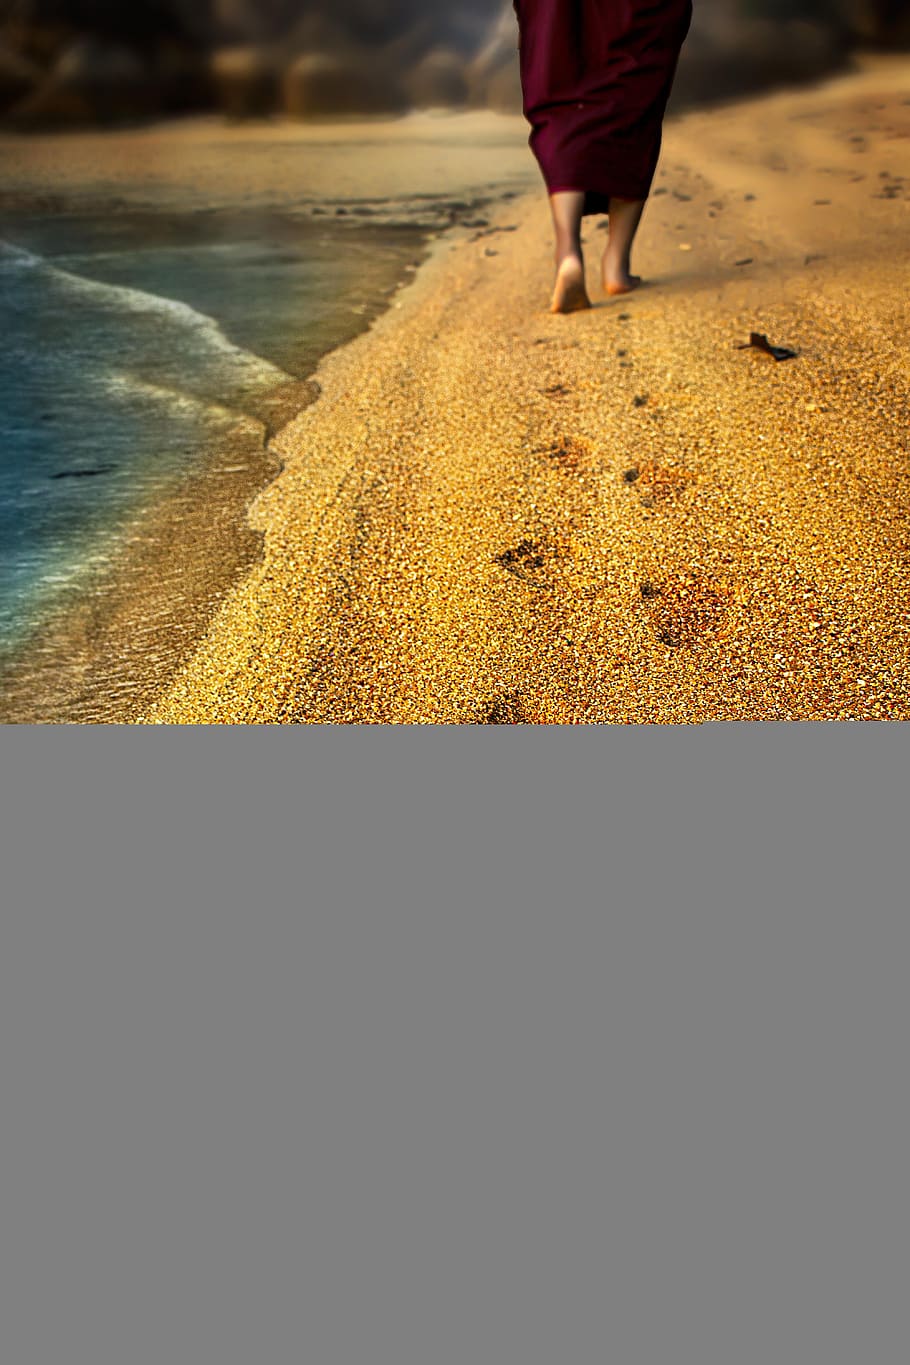 footprint, monk, buddhist, beach, sand, texture, pulau perhentian, walking meditation, low section, real people